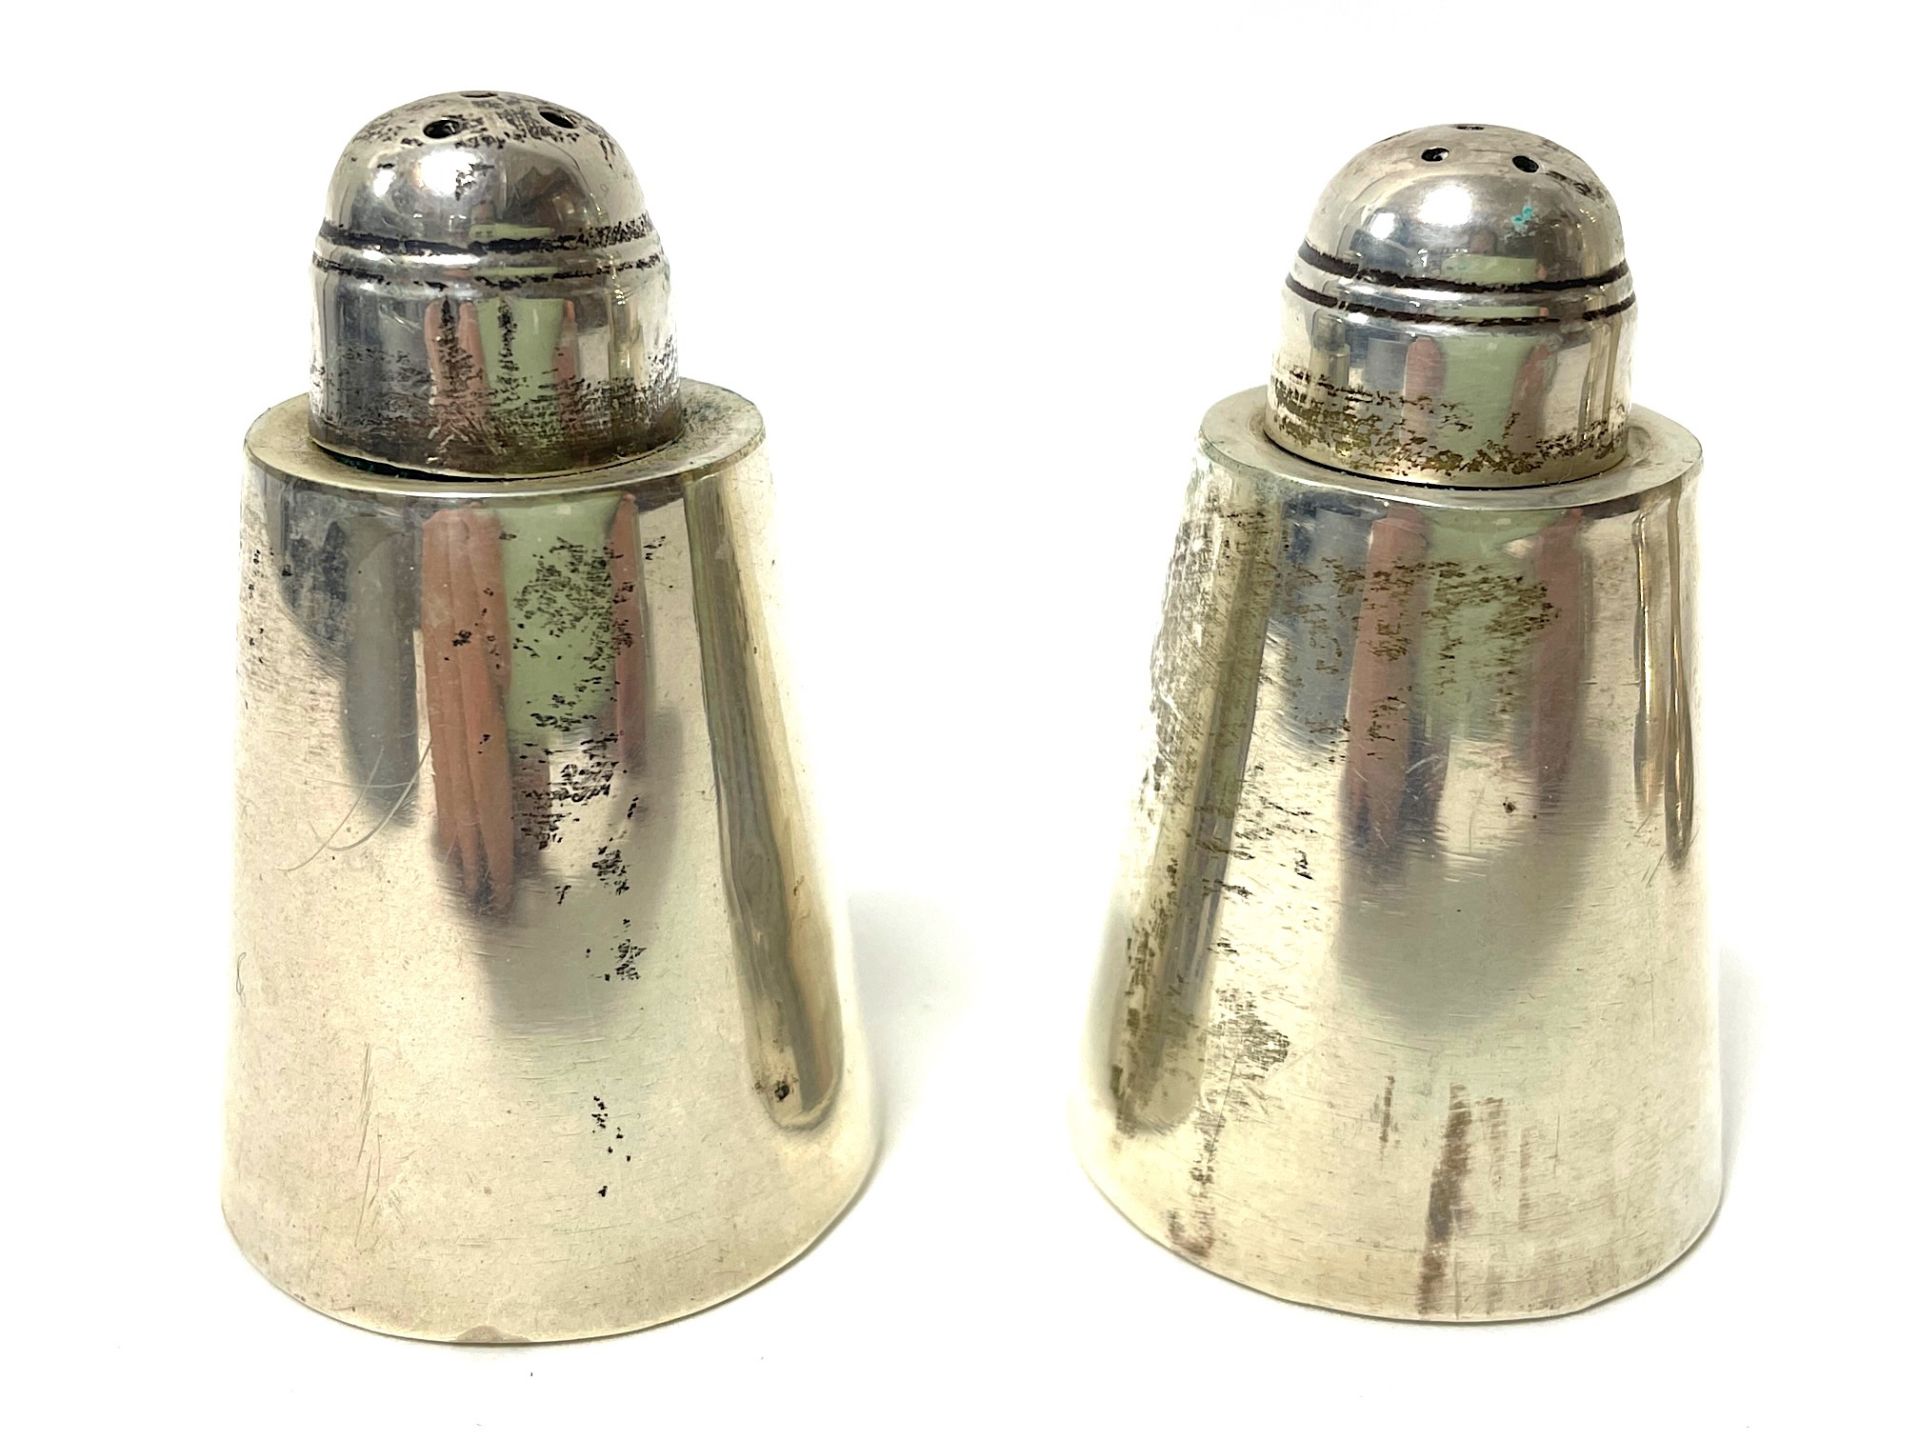 40 pairs of salt/pepper and spice shakers, - Image 35 of 88